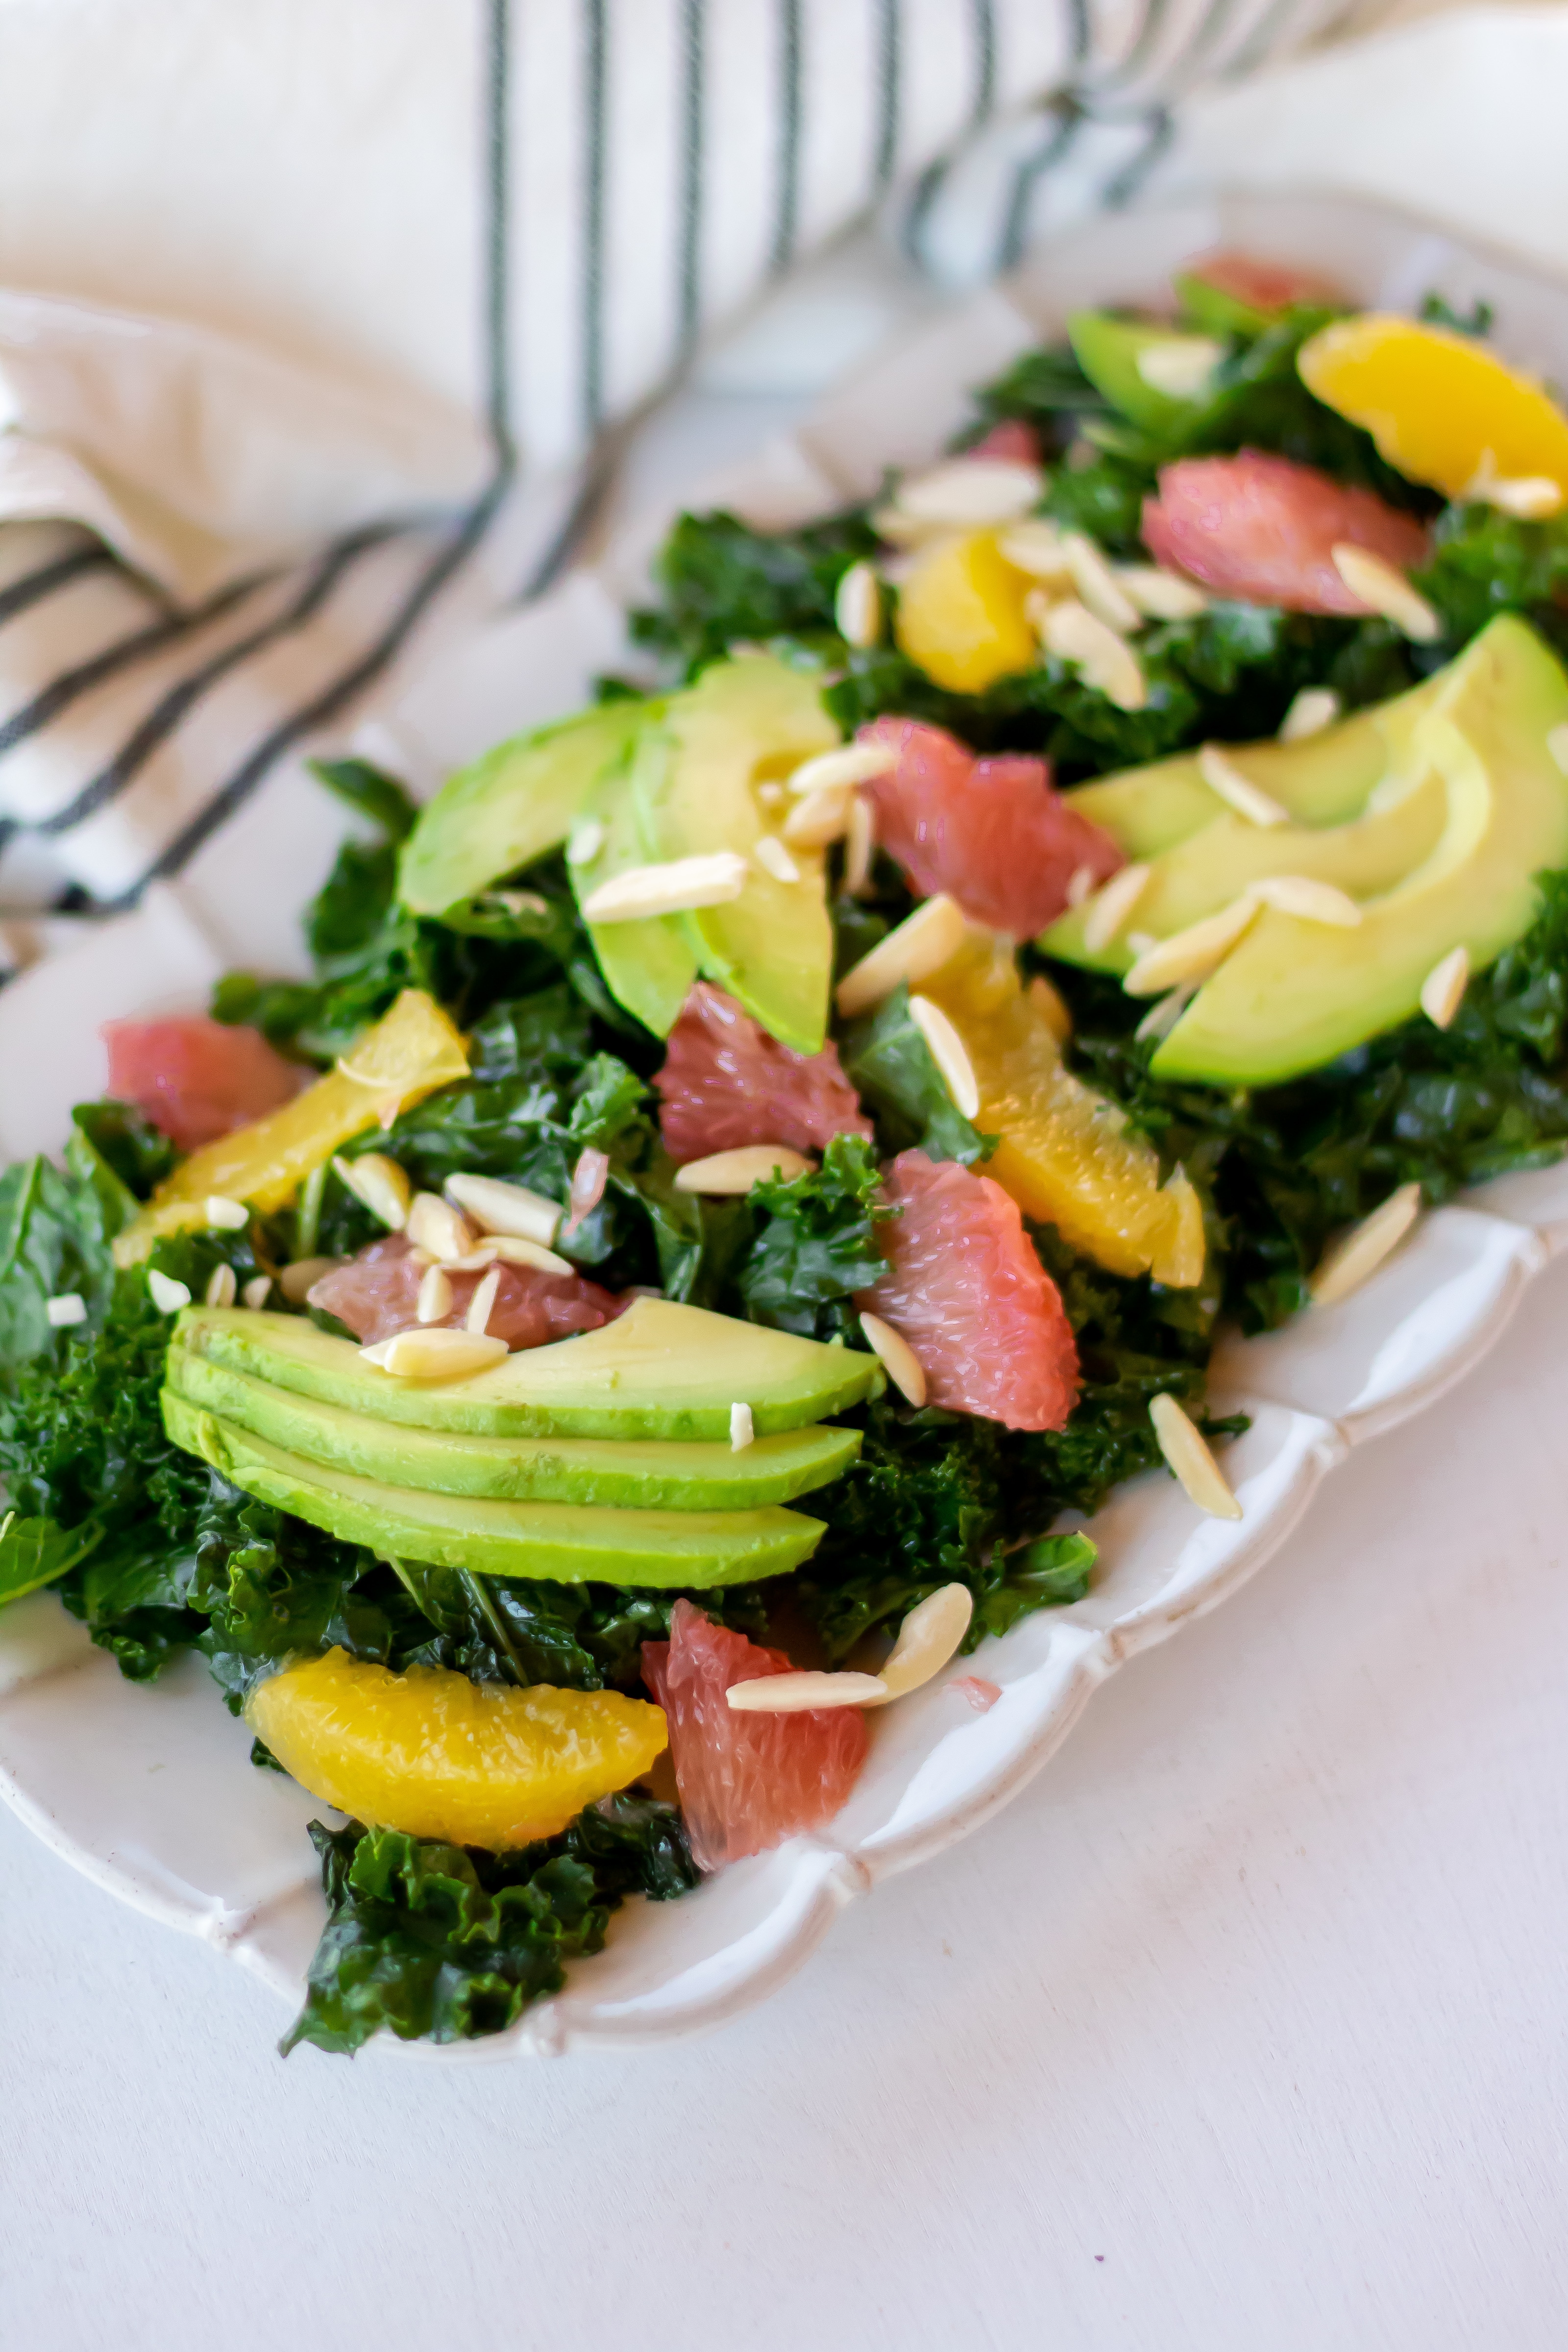 Rectangular plate full of a citrus kale salad massaged with grapefruit vinaigrette and topped with sliced avocado, citrus segments, and slivered almonds.